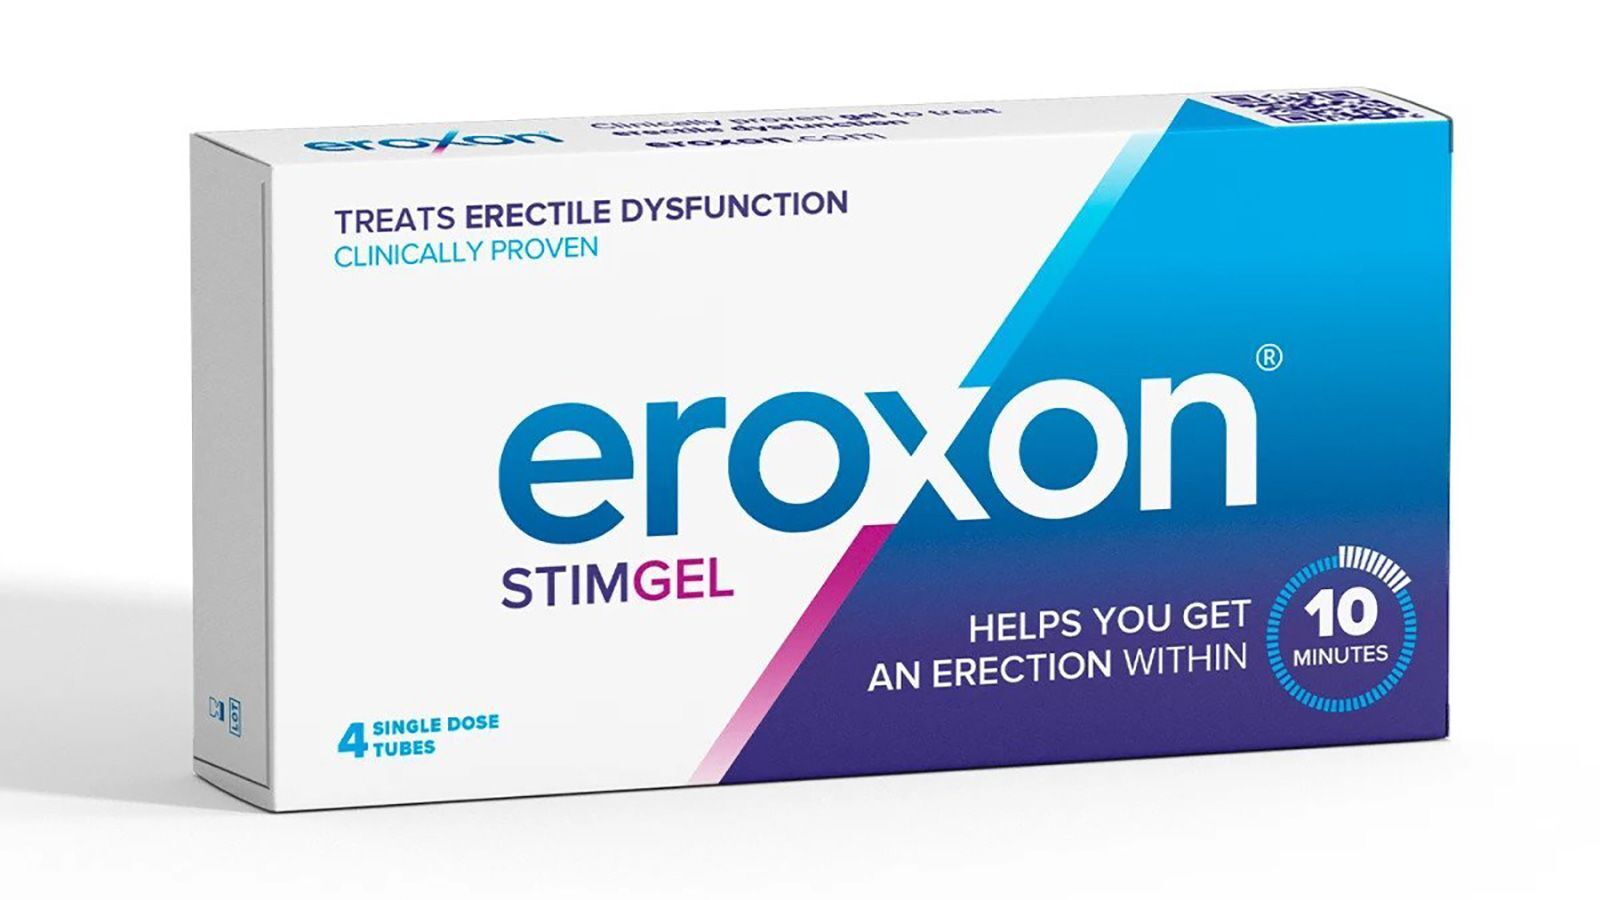 First-of-its-kind erectile dysfunction gel gets FDAs OK for over-the-counter marketing, company says HealthWatch kdrv pic